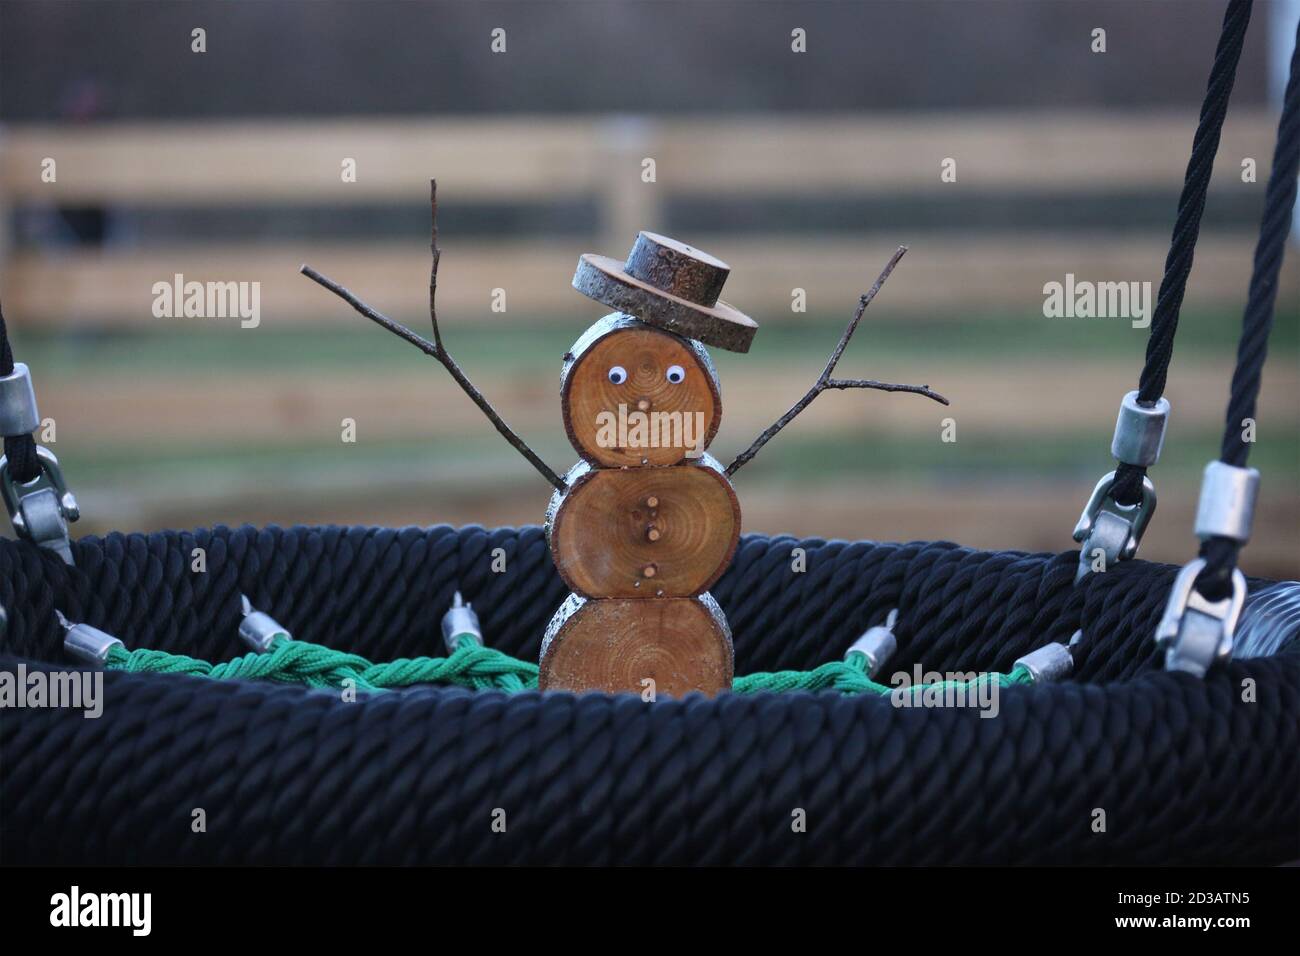 Wooden snowmen made from logs in various places Stock Photo